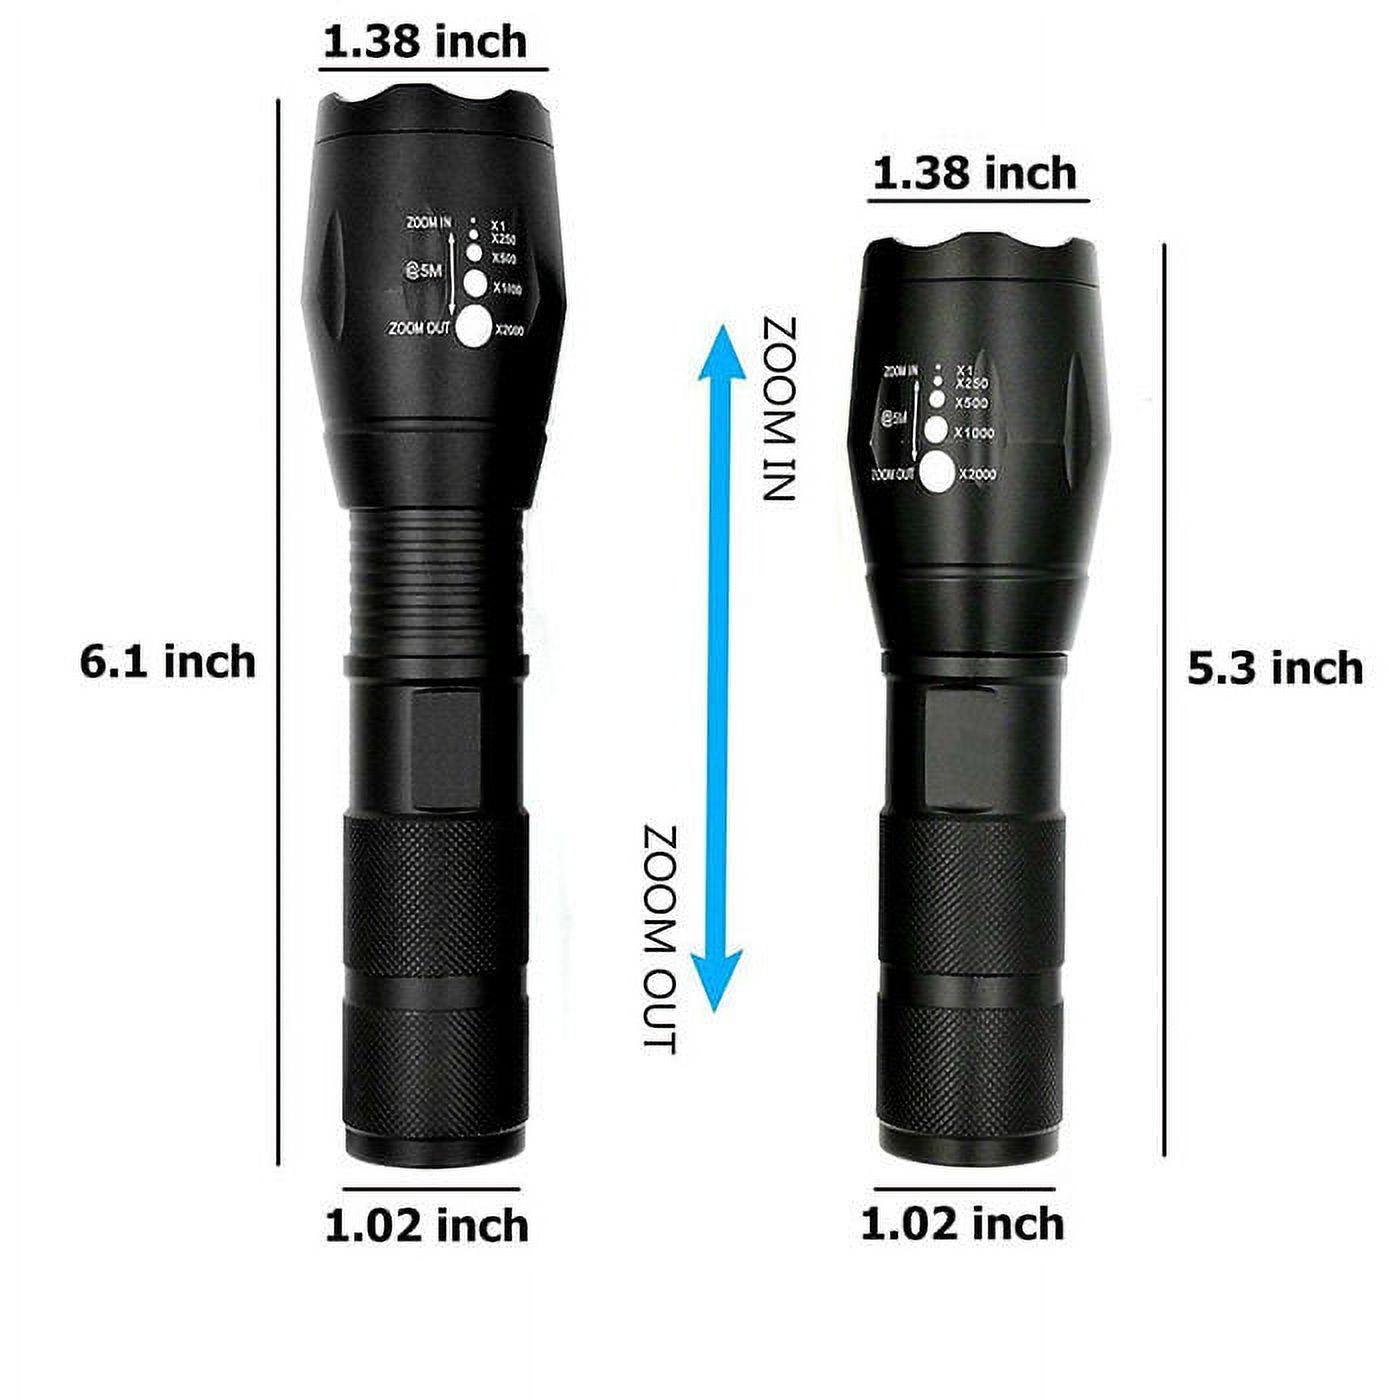 2pc G1400 Military Tactical Flashlight 5 Modes Zoomable Adjustable Focus - Ultra Bright LED Tactical Flashlight - Full Kit  (Black) - image 3 of 4